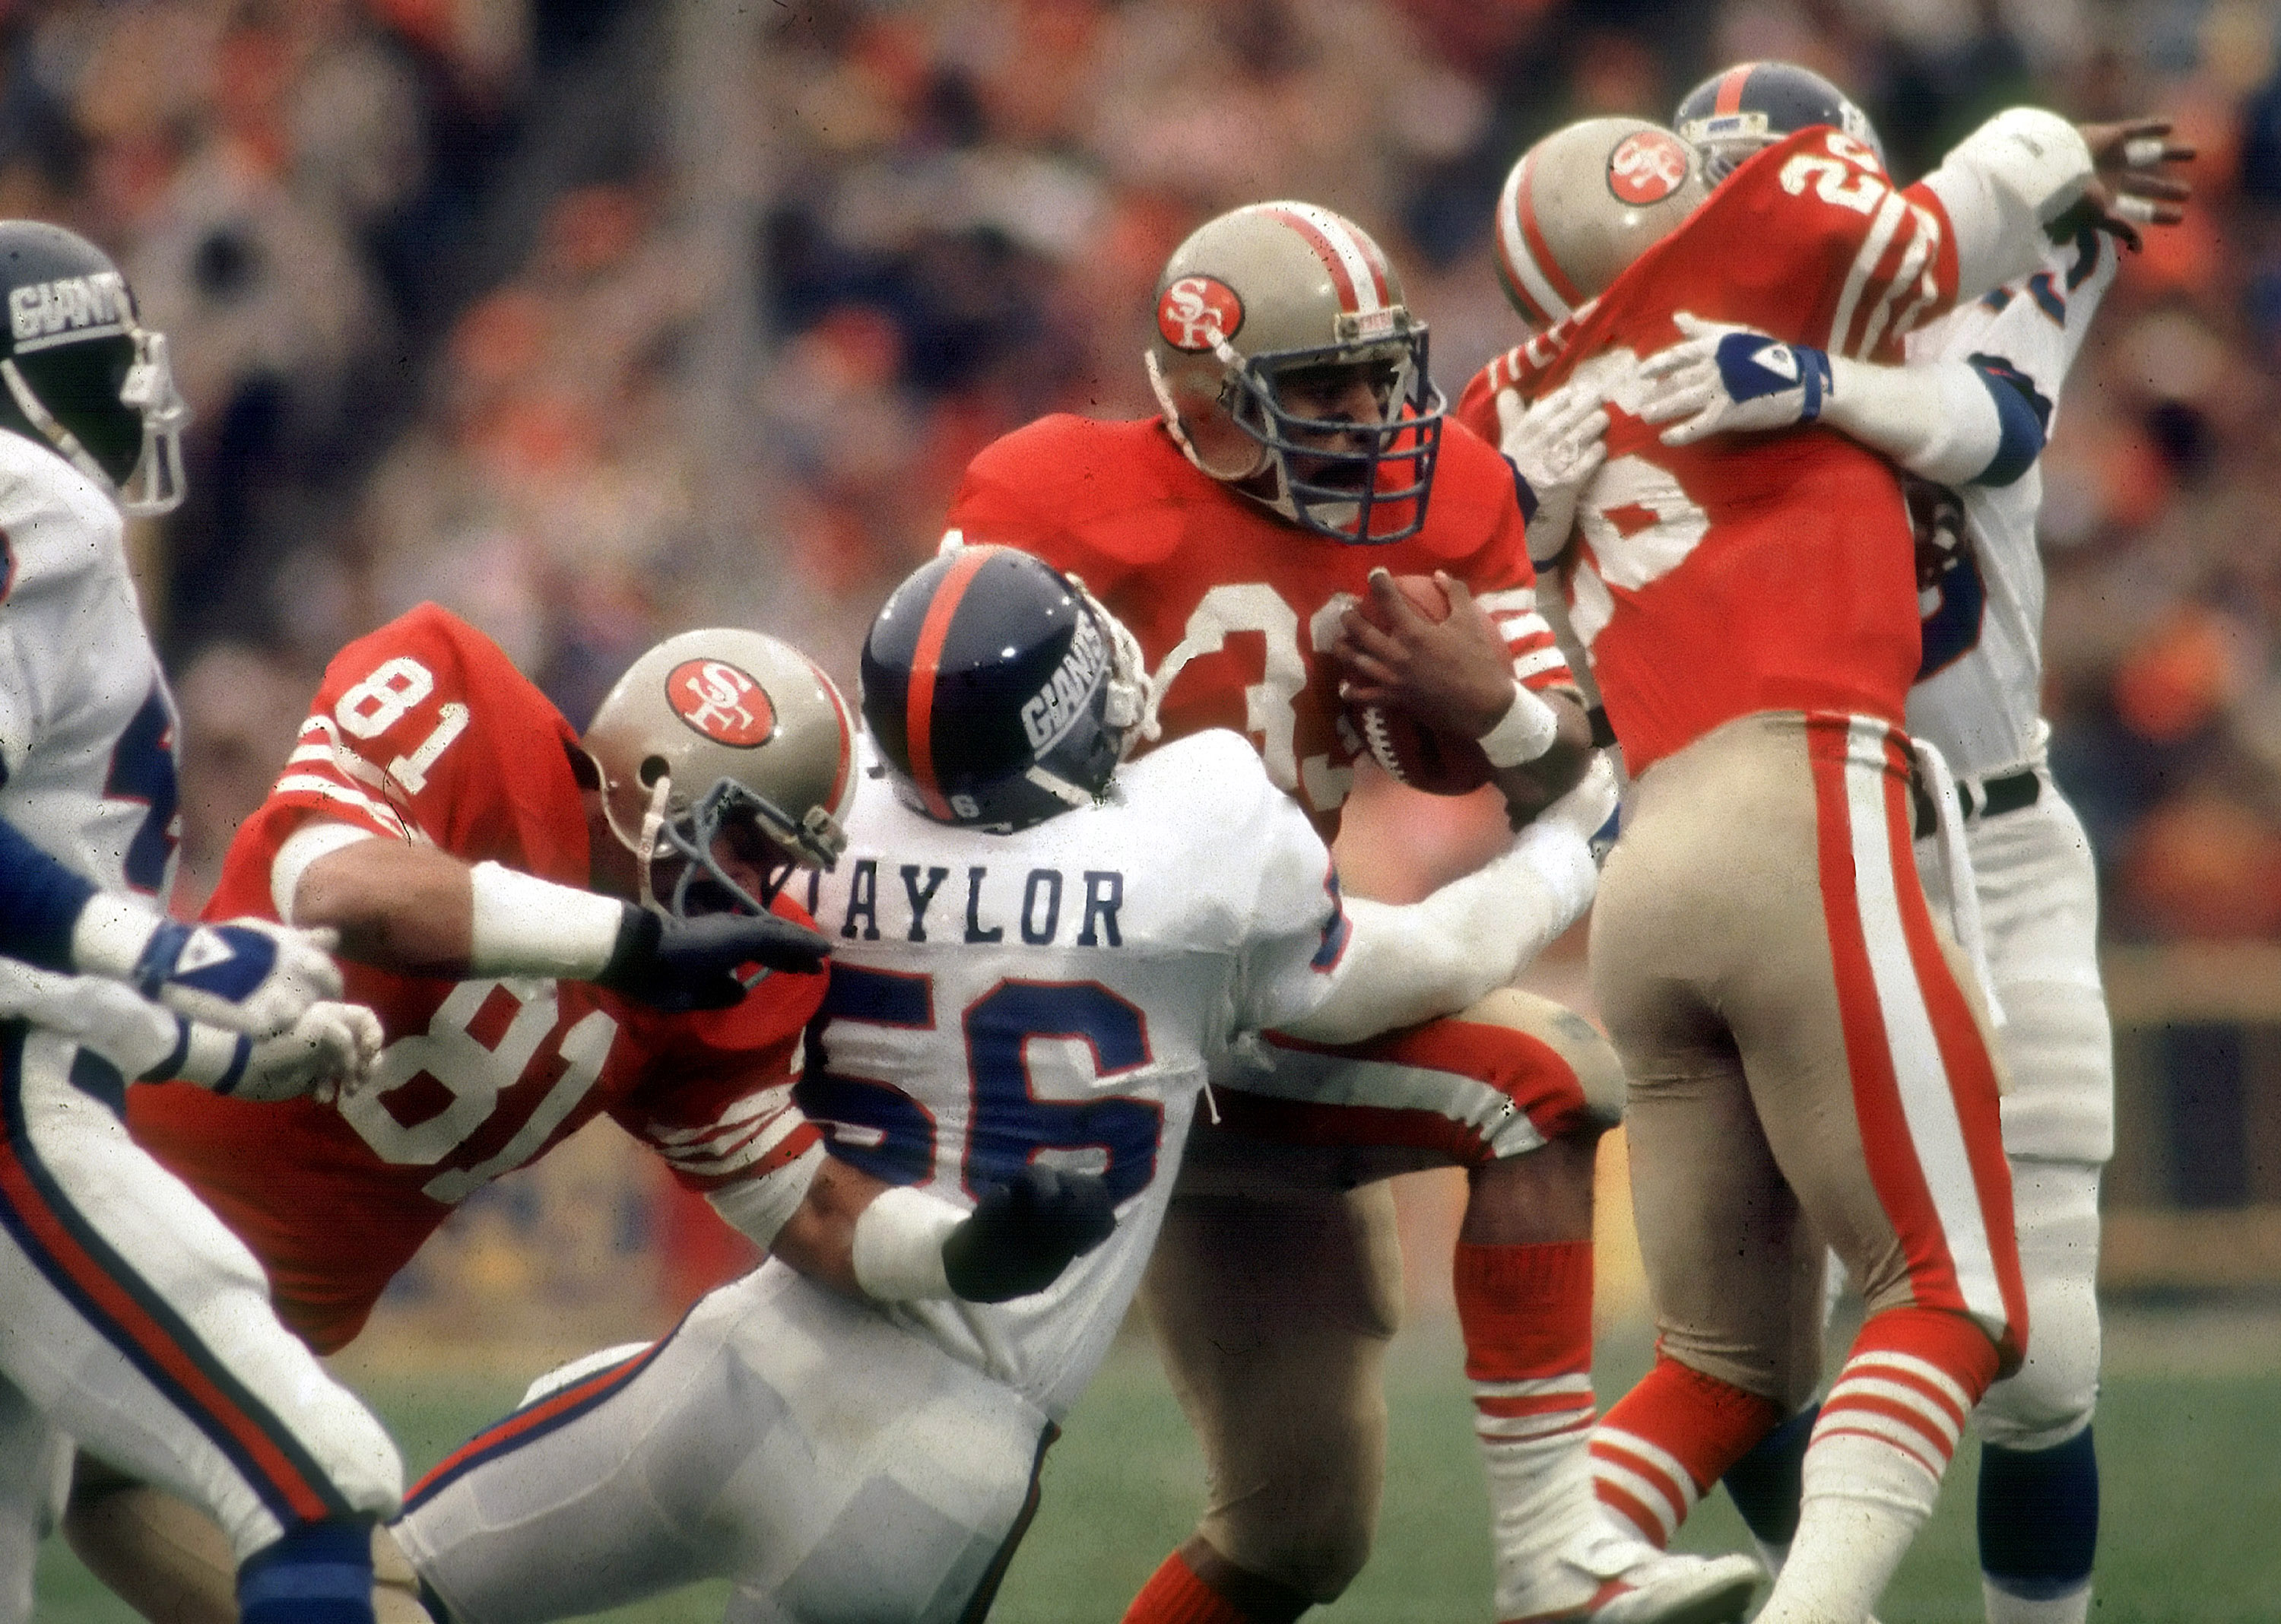 1984 NFC Divisional Playoff Game - New York Giants vs San Francisco 49ers - December 29, 1984